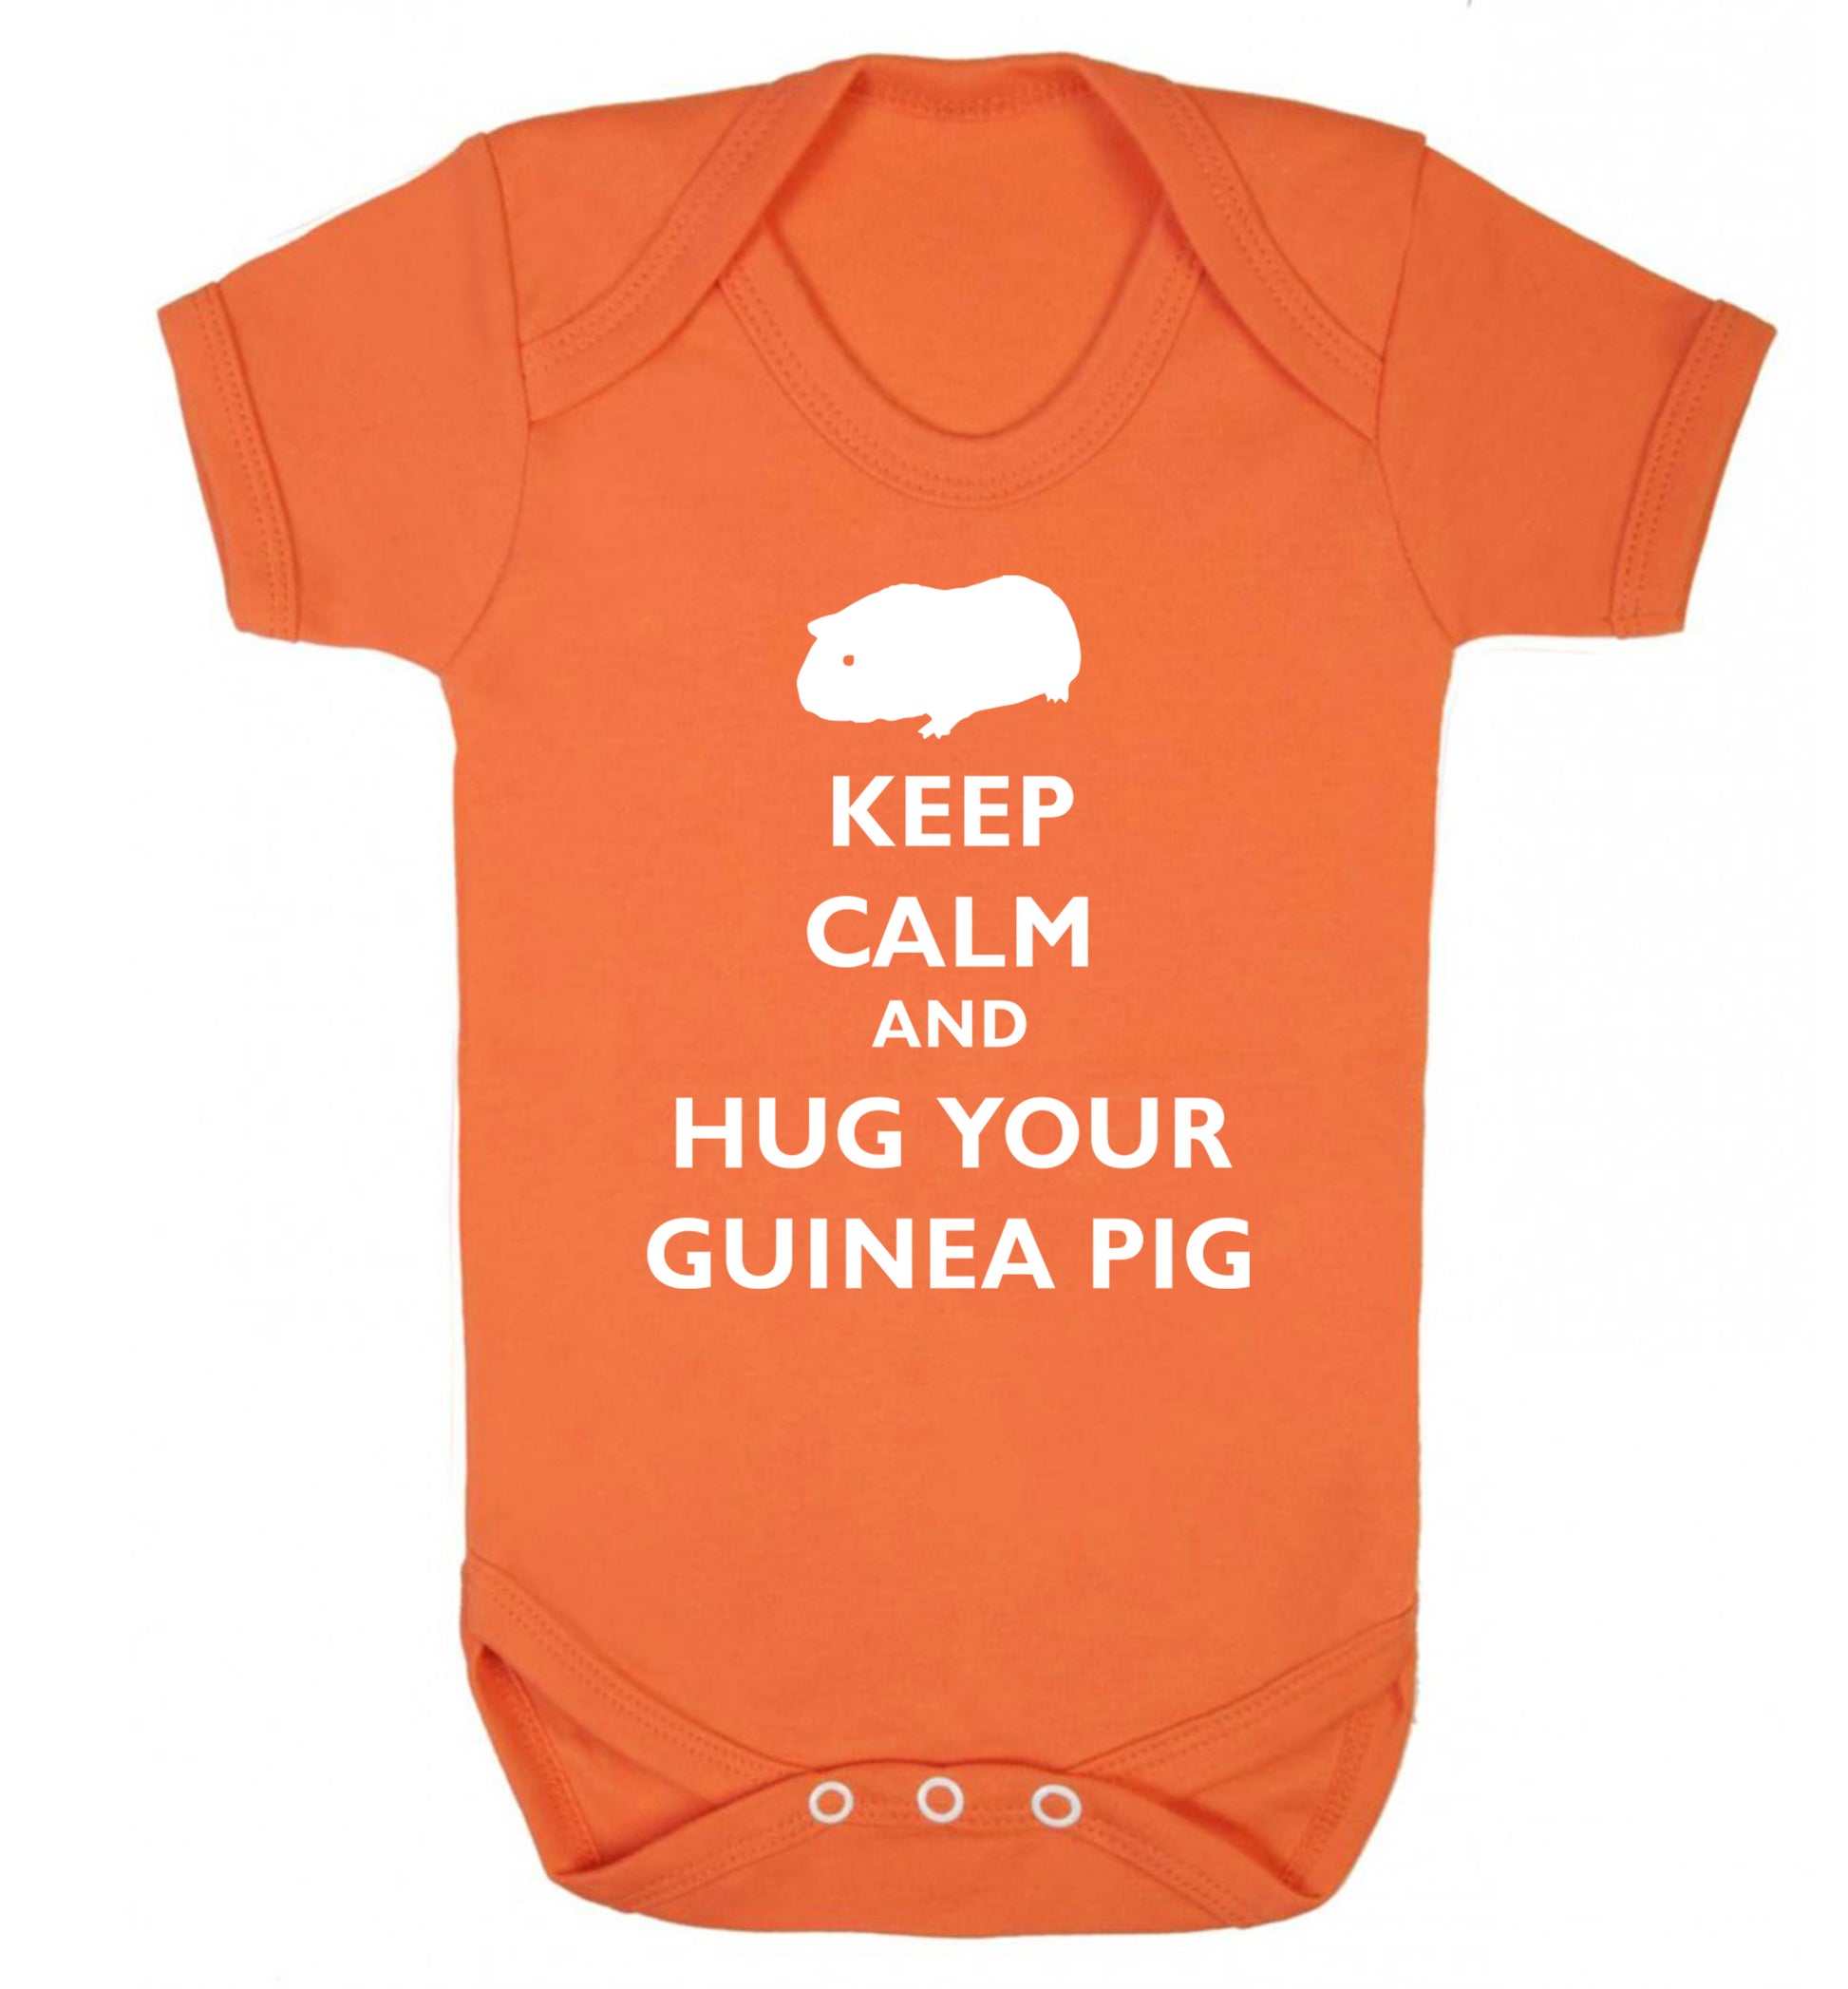 Keep calm and hug your guineapig Baby Vest orange 18-24 months